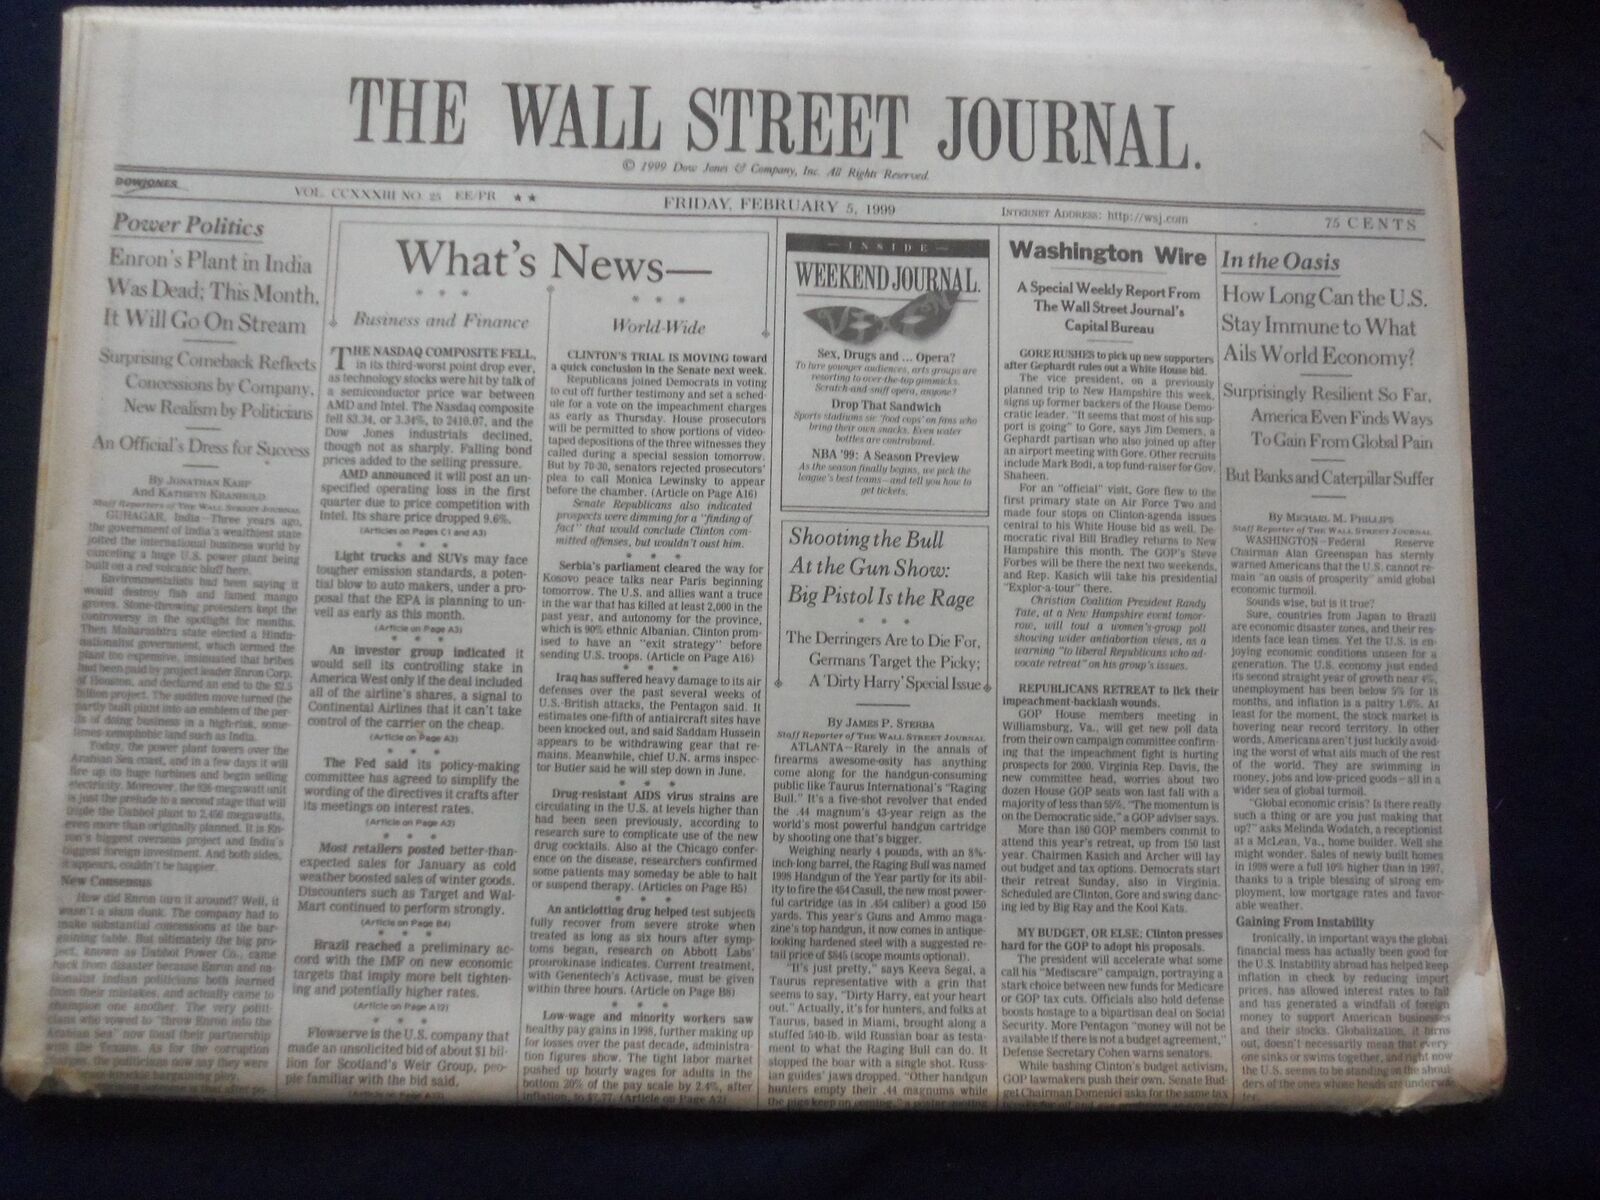 1999 FEB 5 THE WALL STREET JOURNAL - ENRON\'S PLANT IN INDIA WAS DEAD - WJ 305